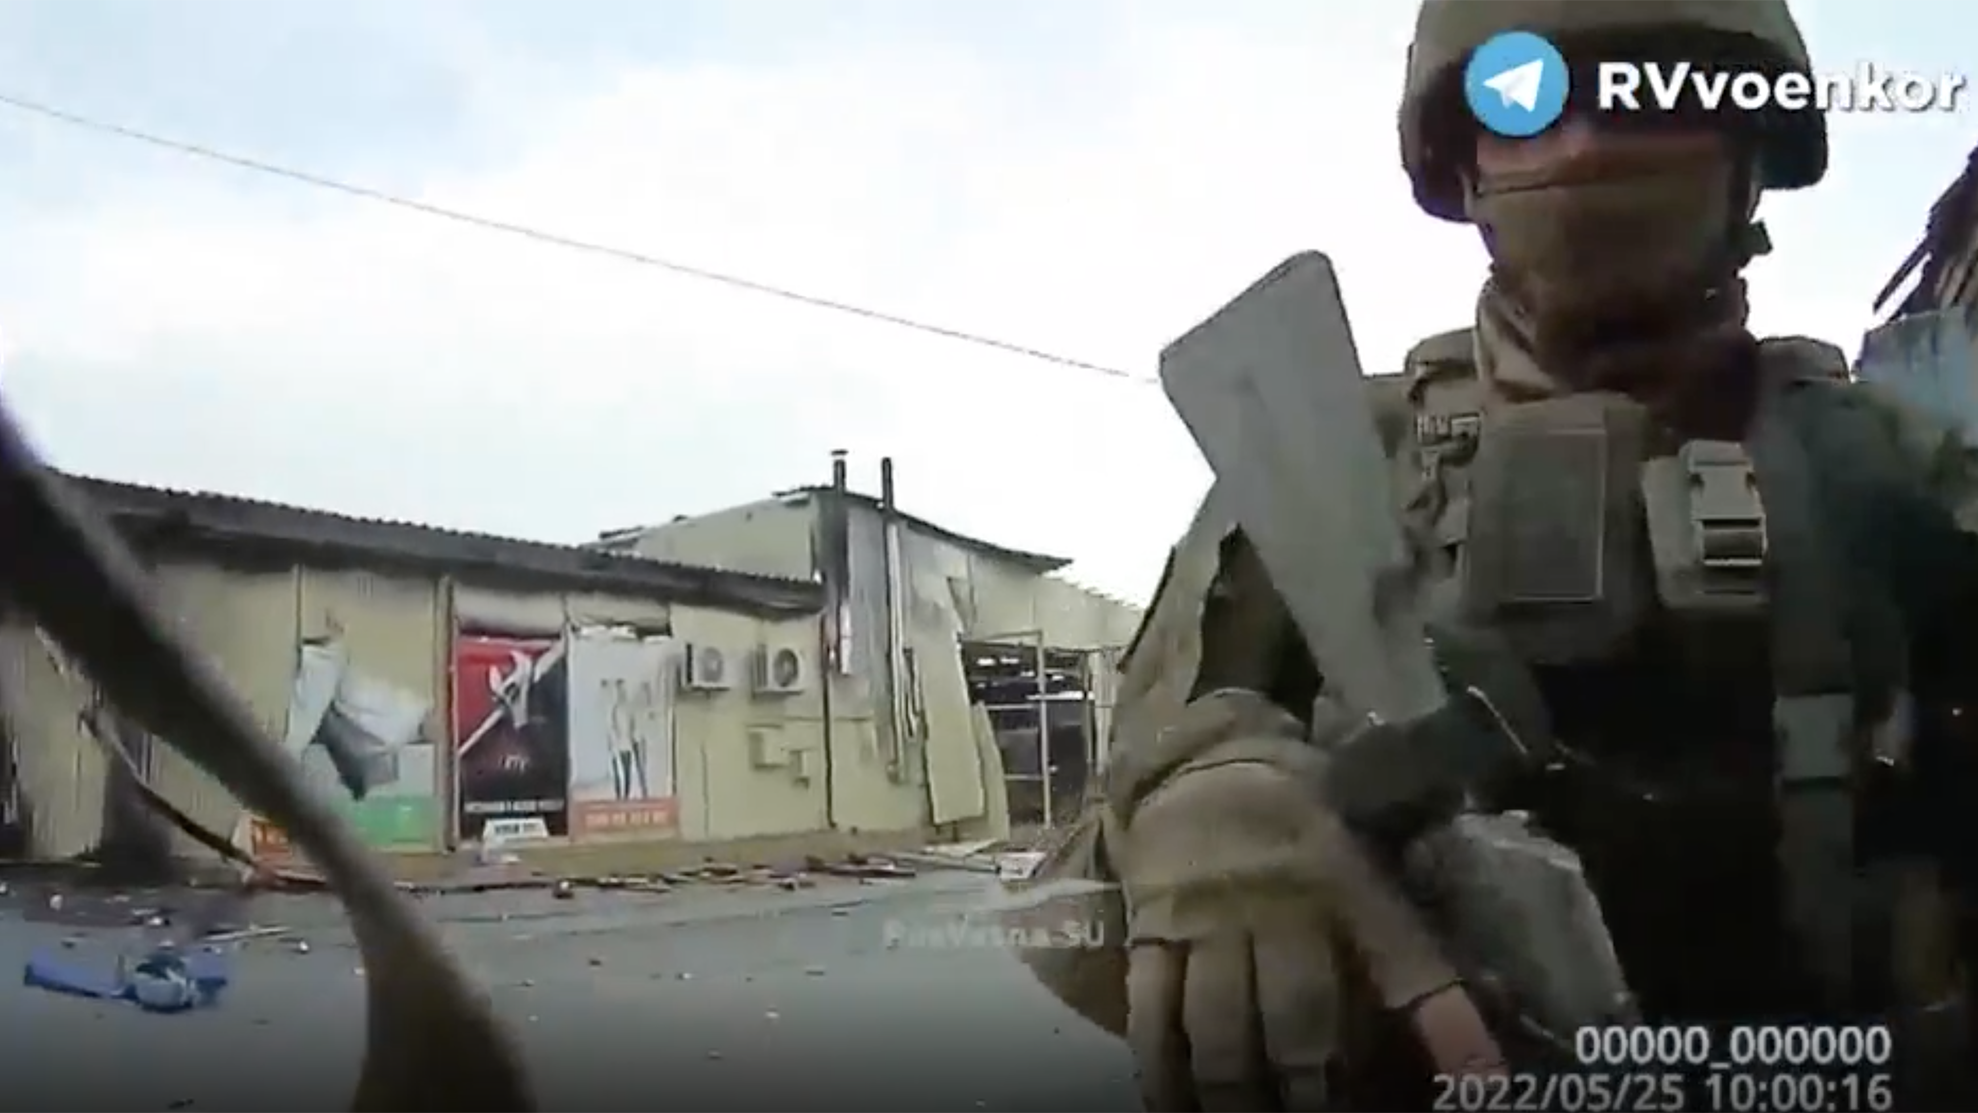 Bodycam footage filmed by a soldier "Risk" May 25 shows the incredible devastation around the Ukrainian city of Lemon, as Russian troops pass under destroyed buildings and empty streets.